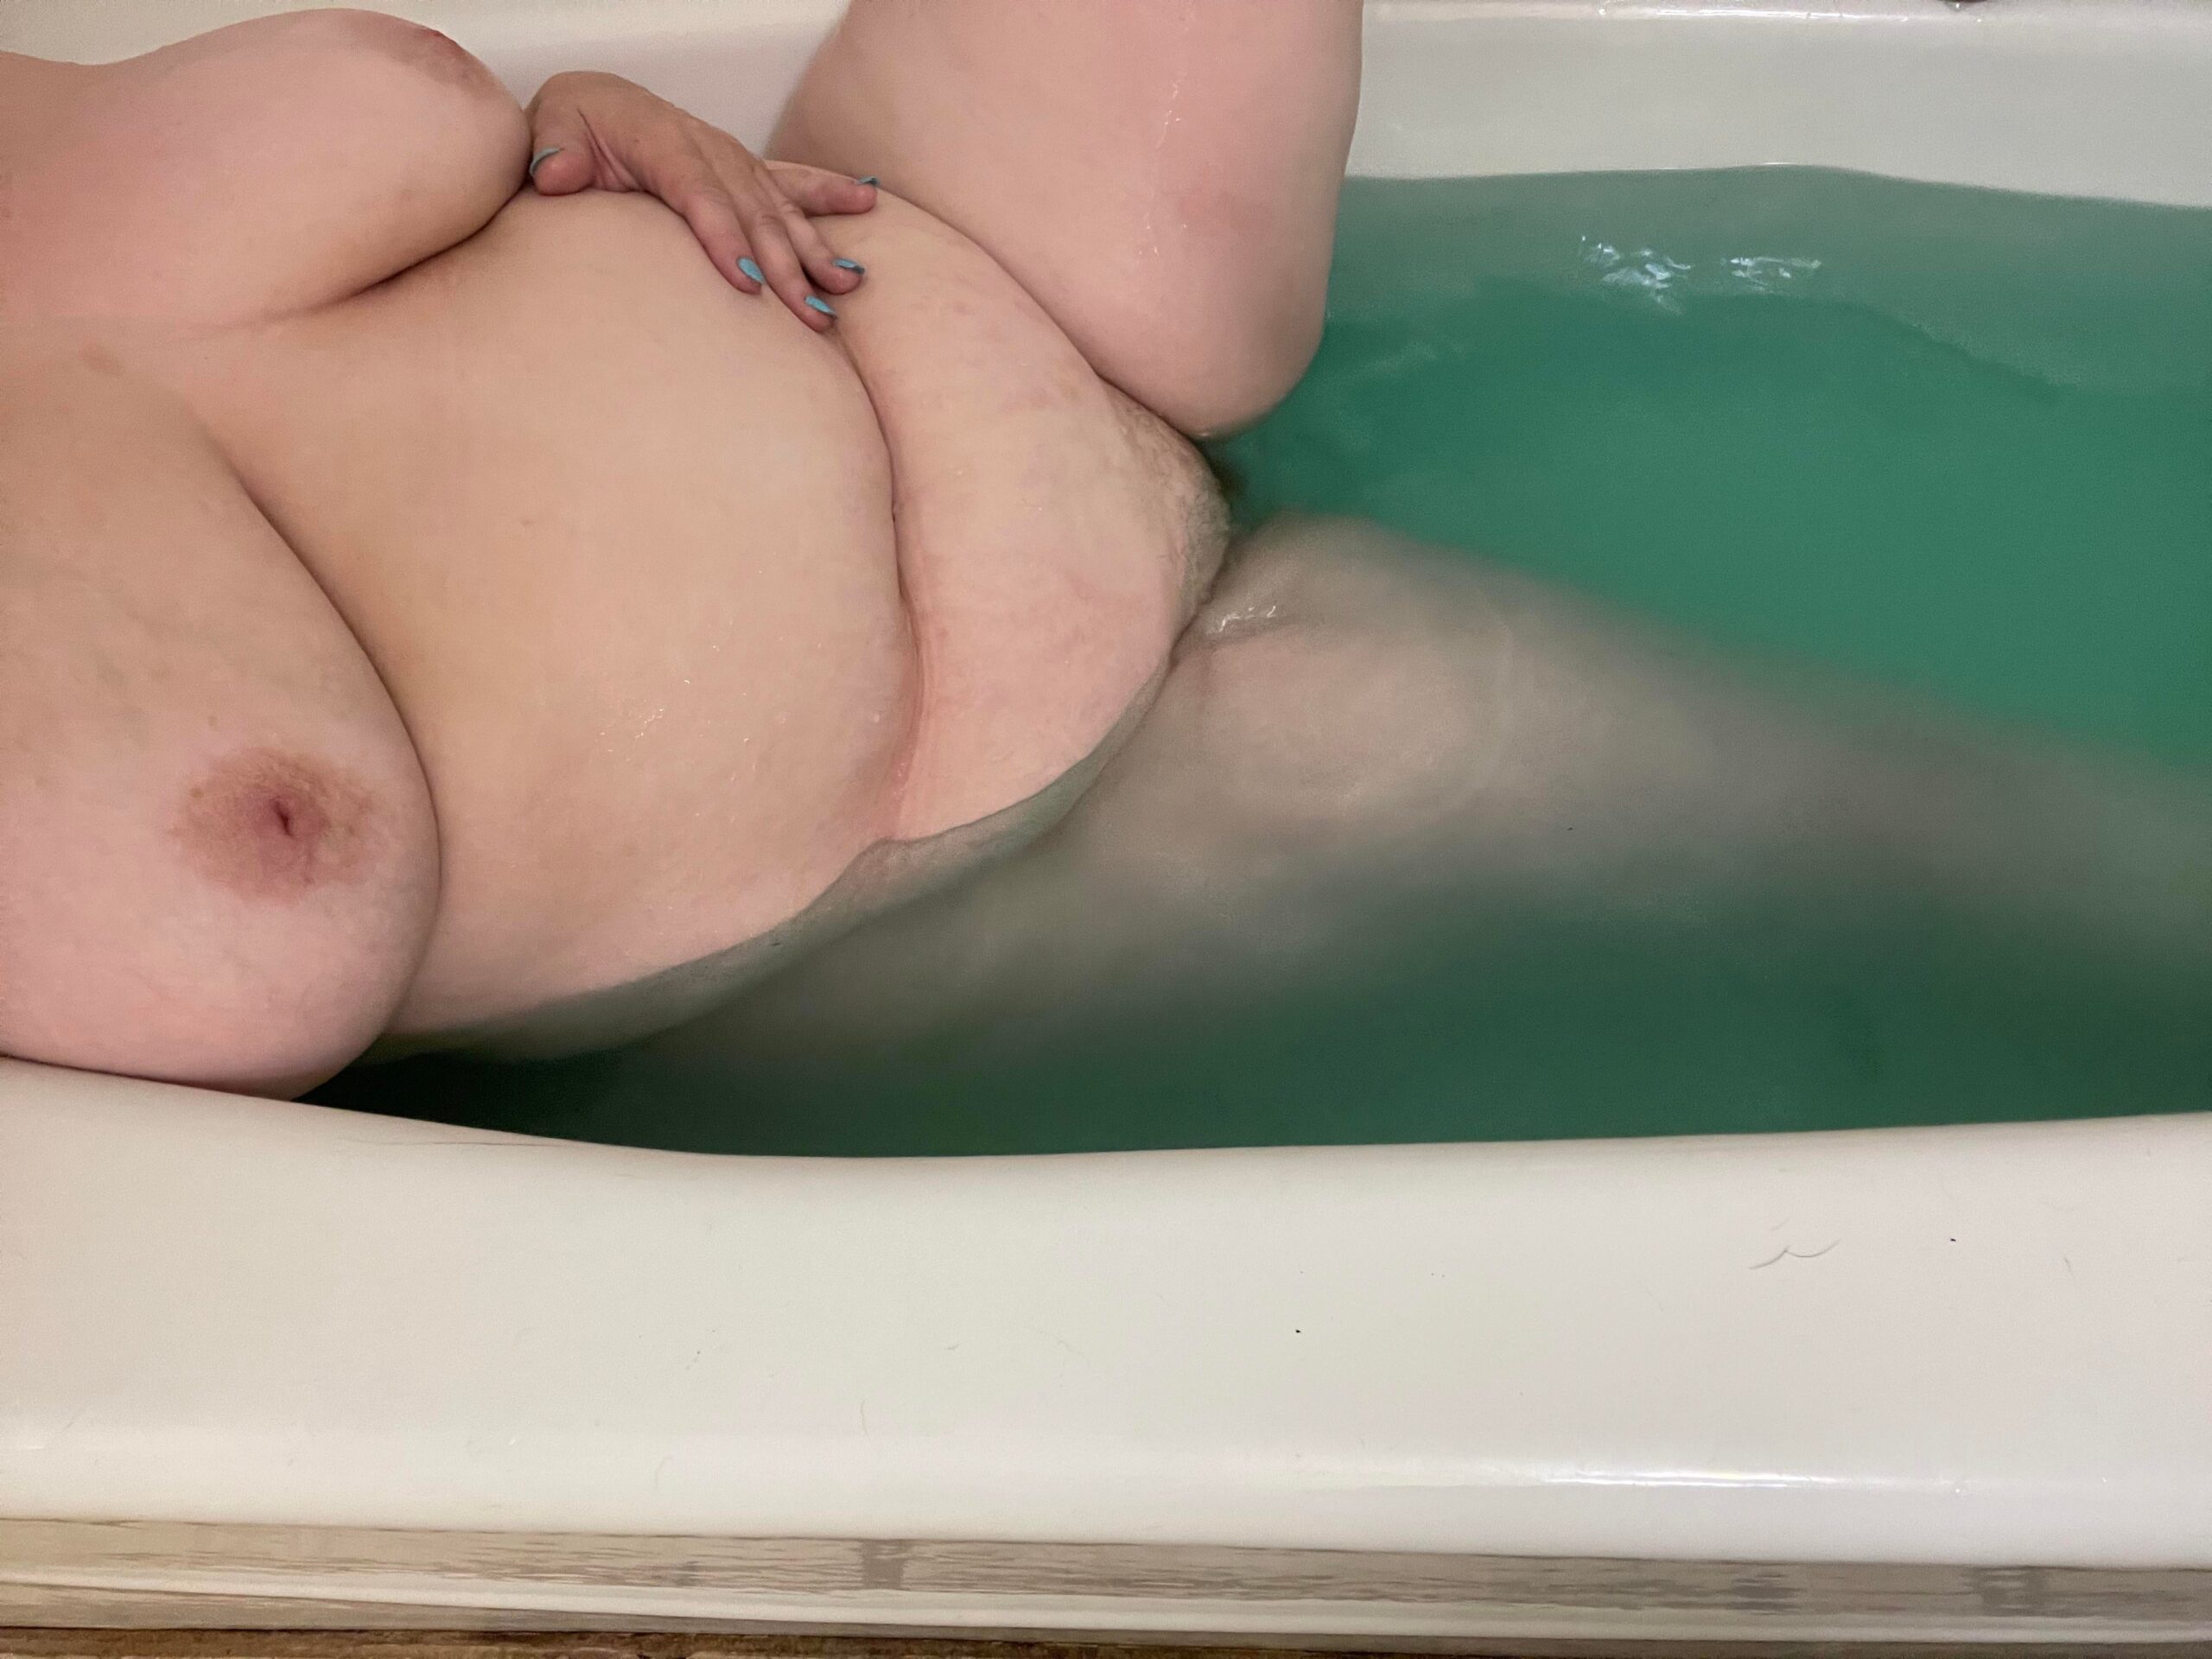 BBW Solo -  Been doing chores all morning….time to clean up